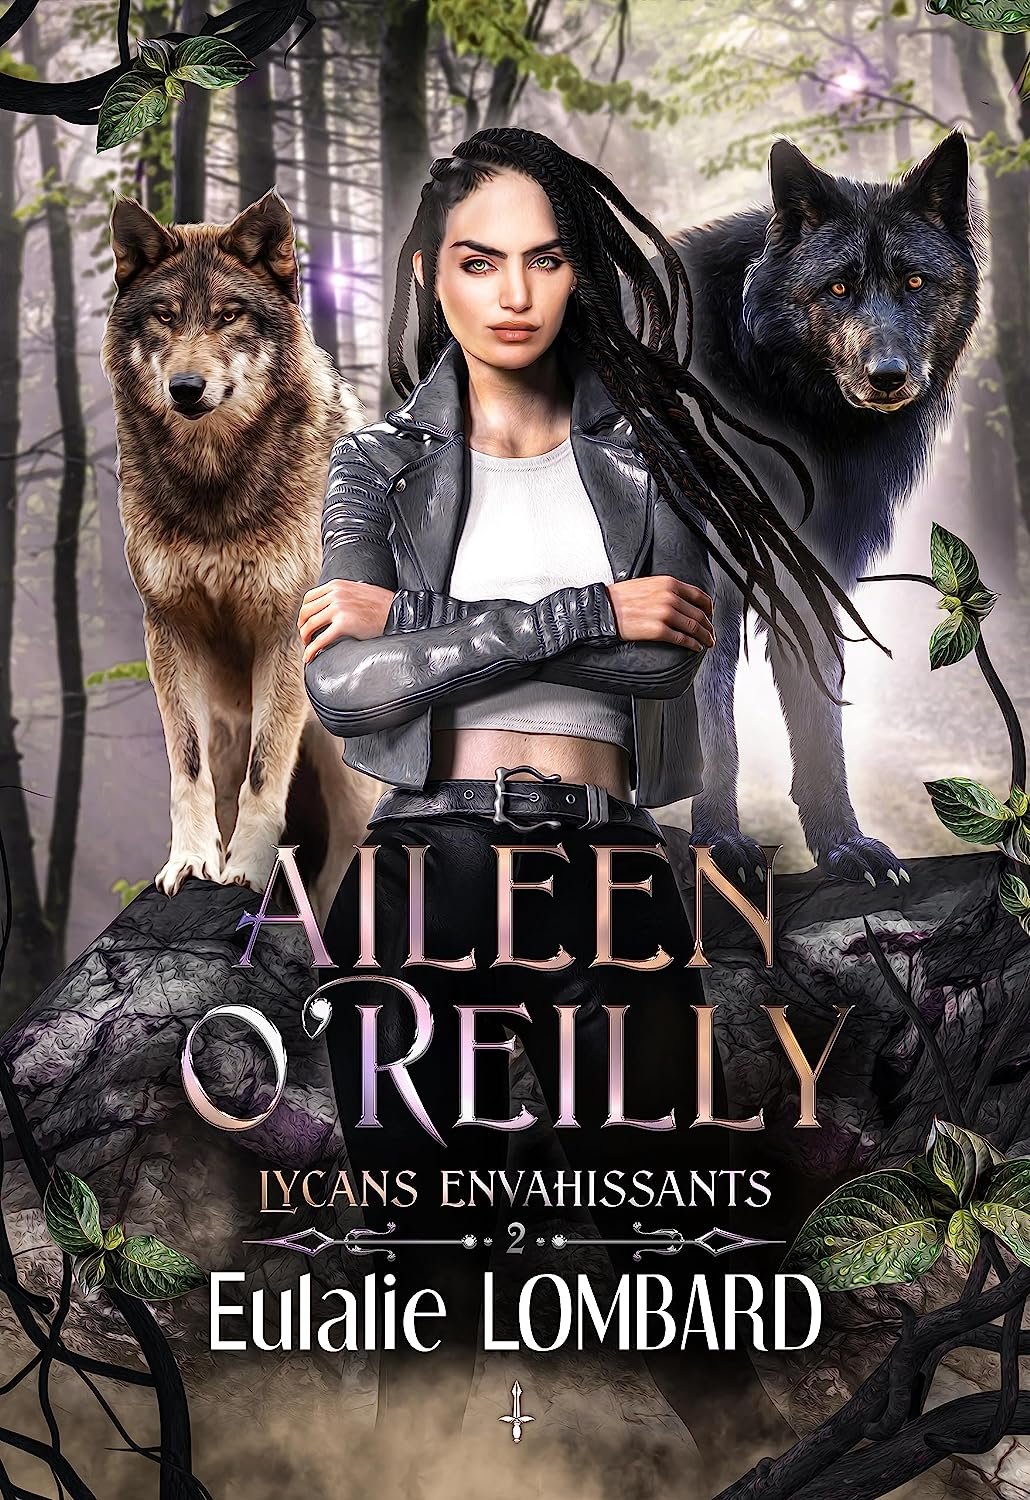 Eulalie Lombard - Aileen O'Reilly 2 : Lycans envahissants